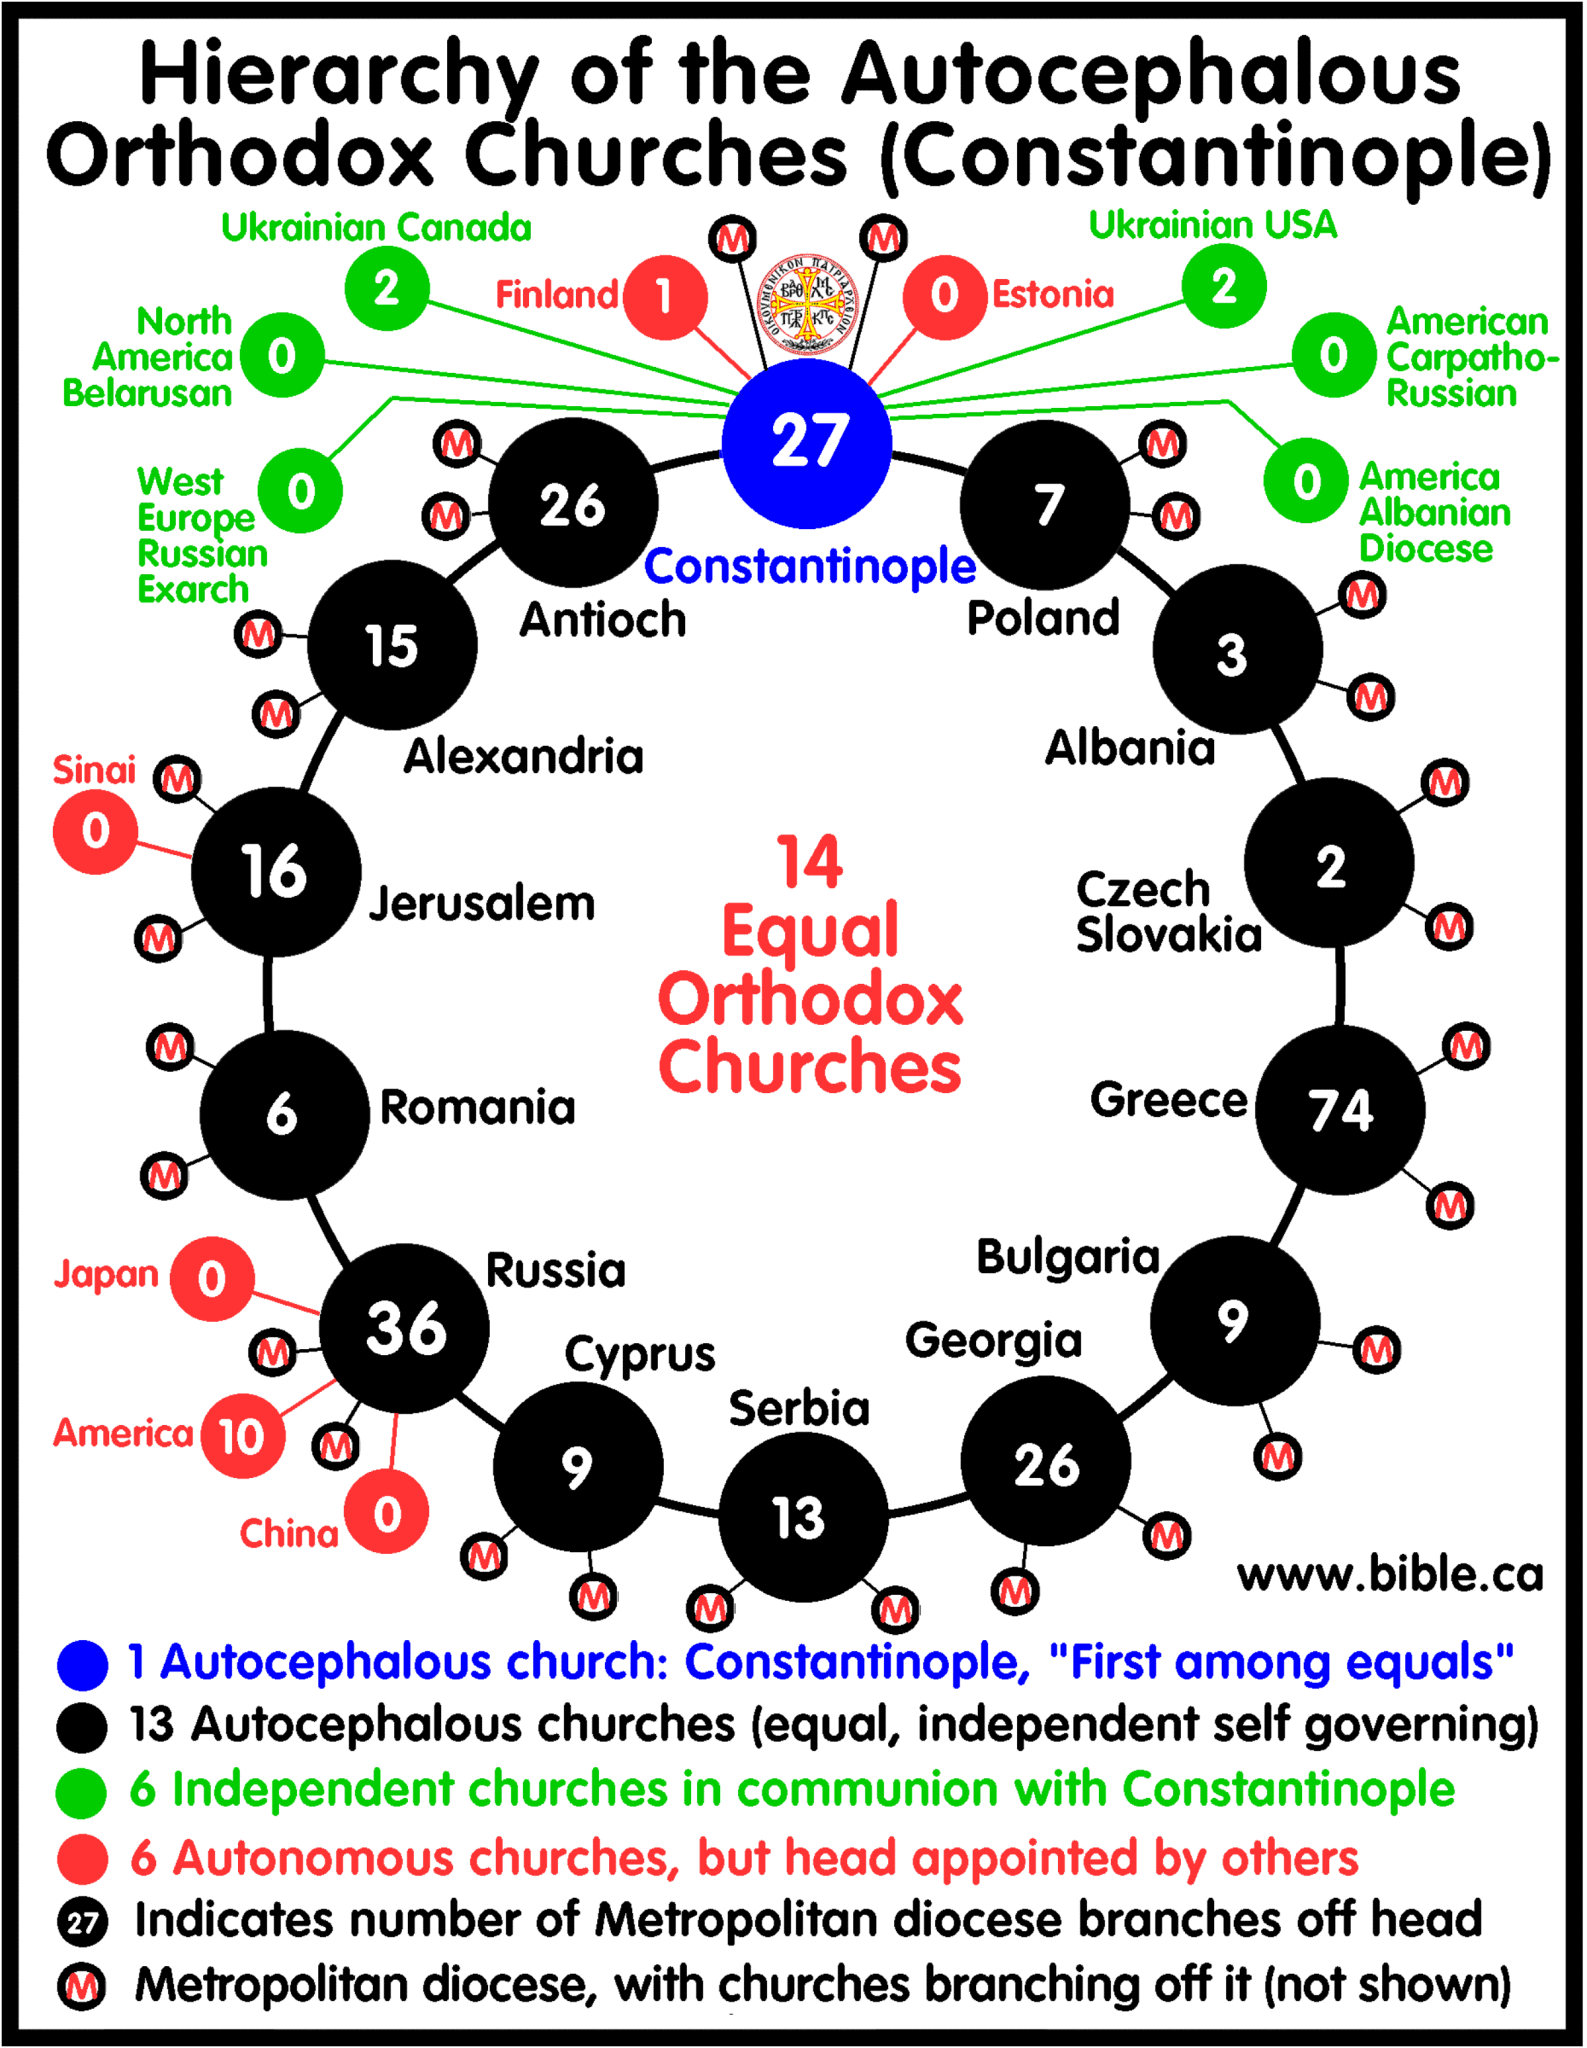 Structure of the Orthodox Church. Image: www.bible.ca